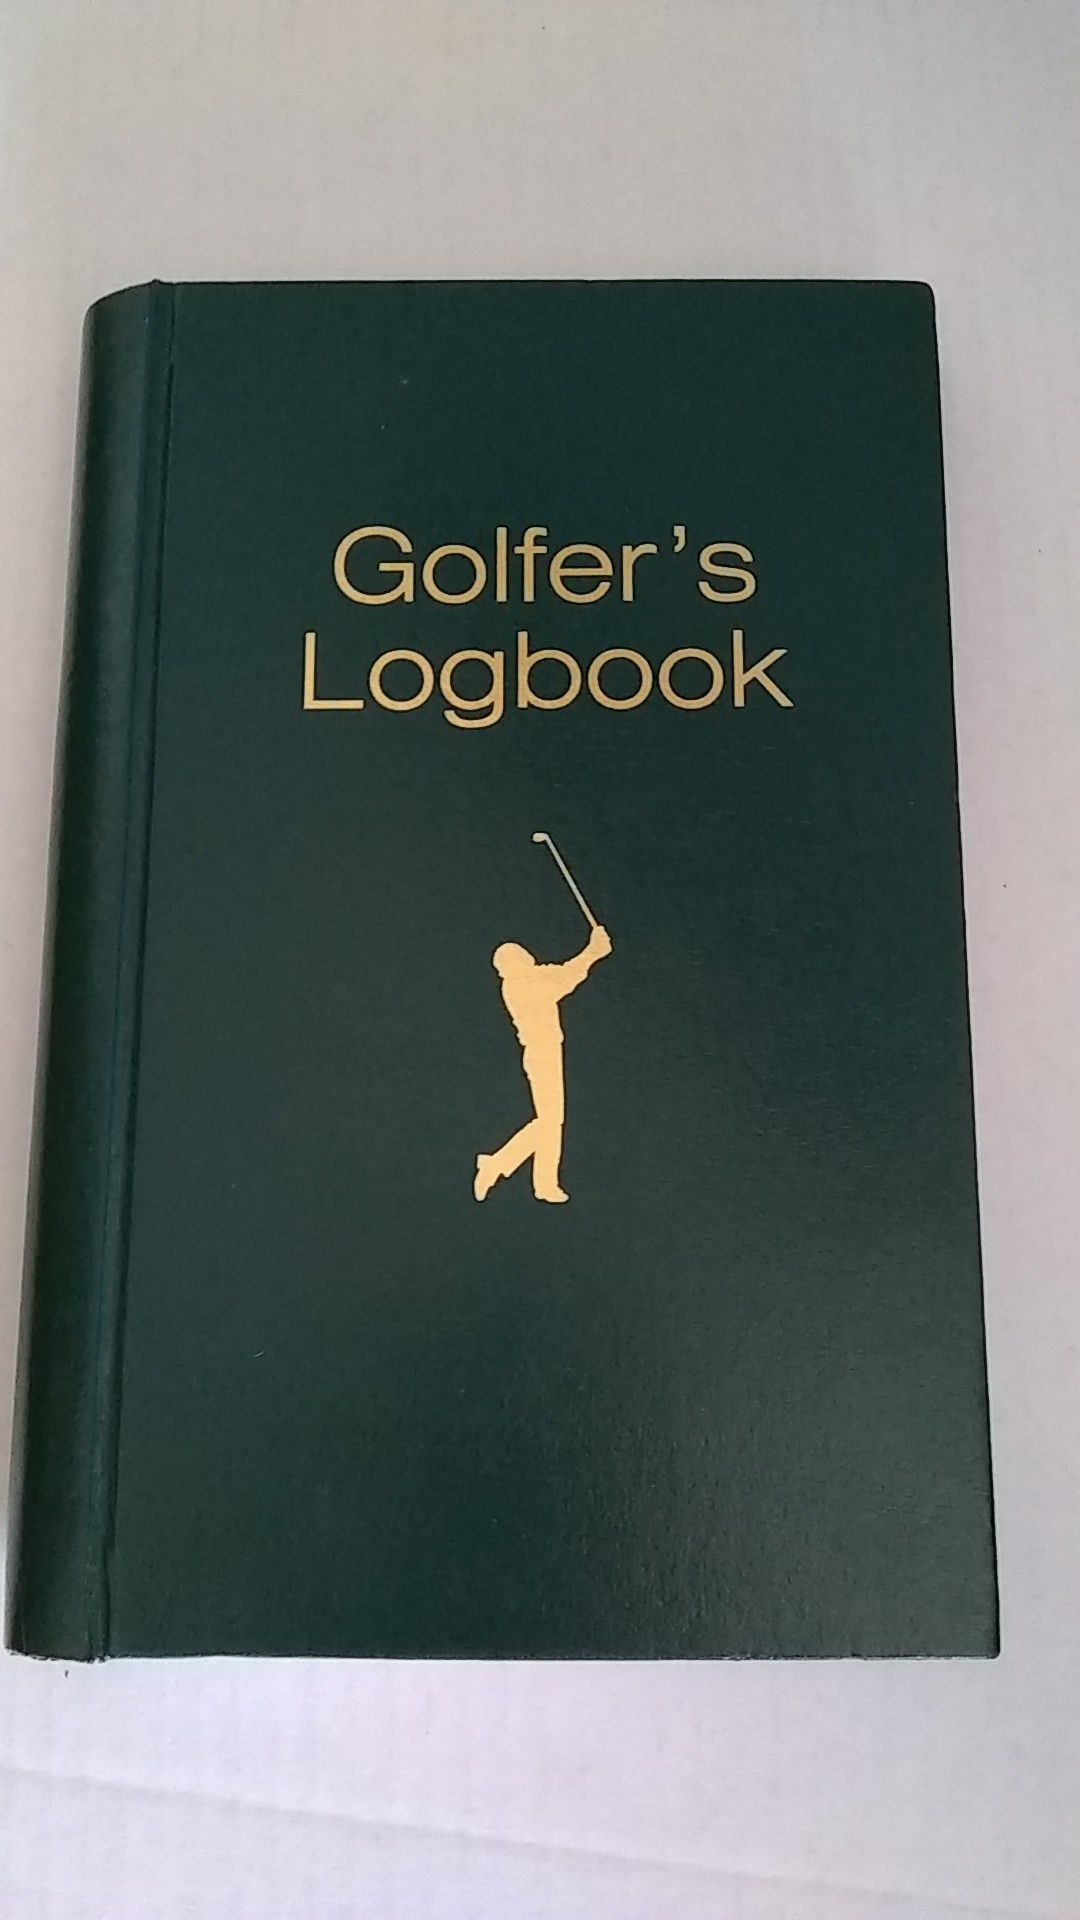 Golfer's logbook new condition